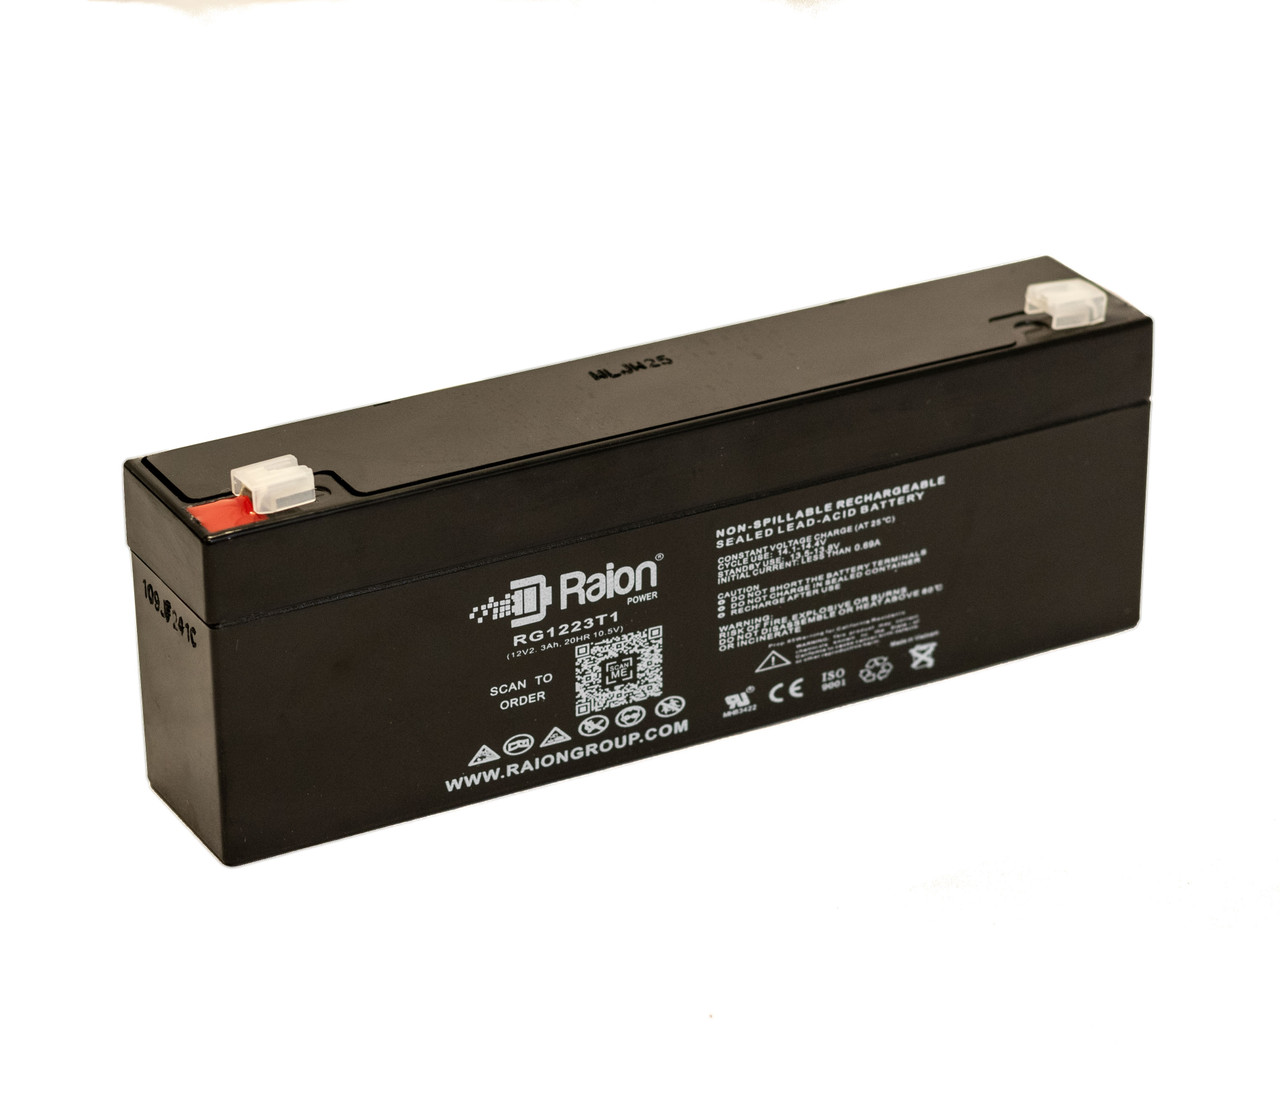 Raion Power RG1223T1 Replacement Battery for Ohio Medical Products BIOX IVA 3760 Oximeter